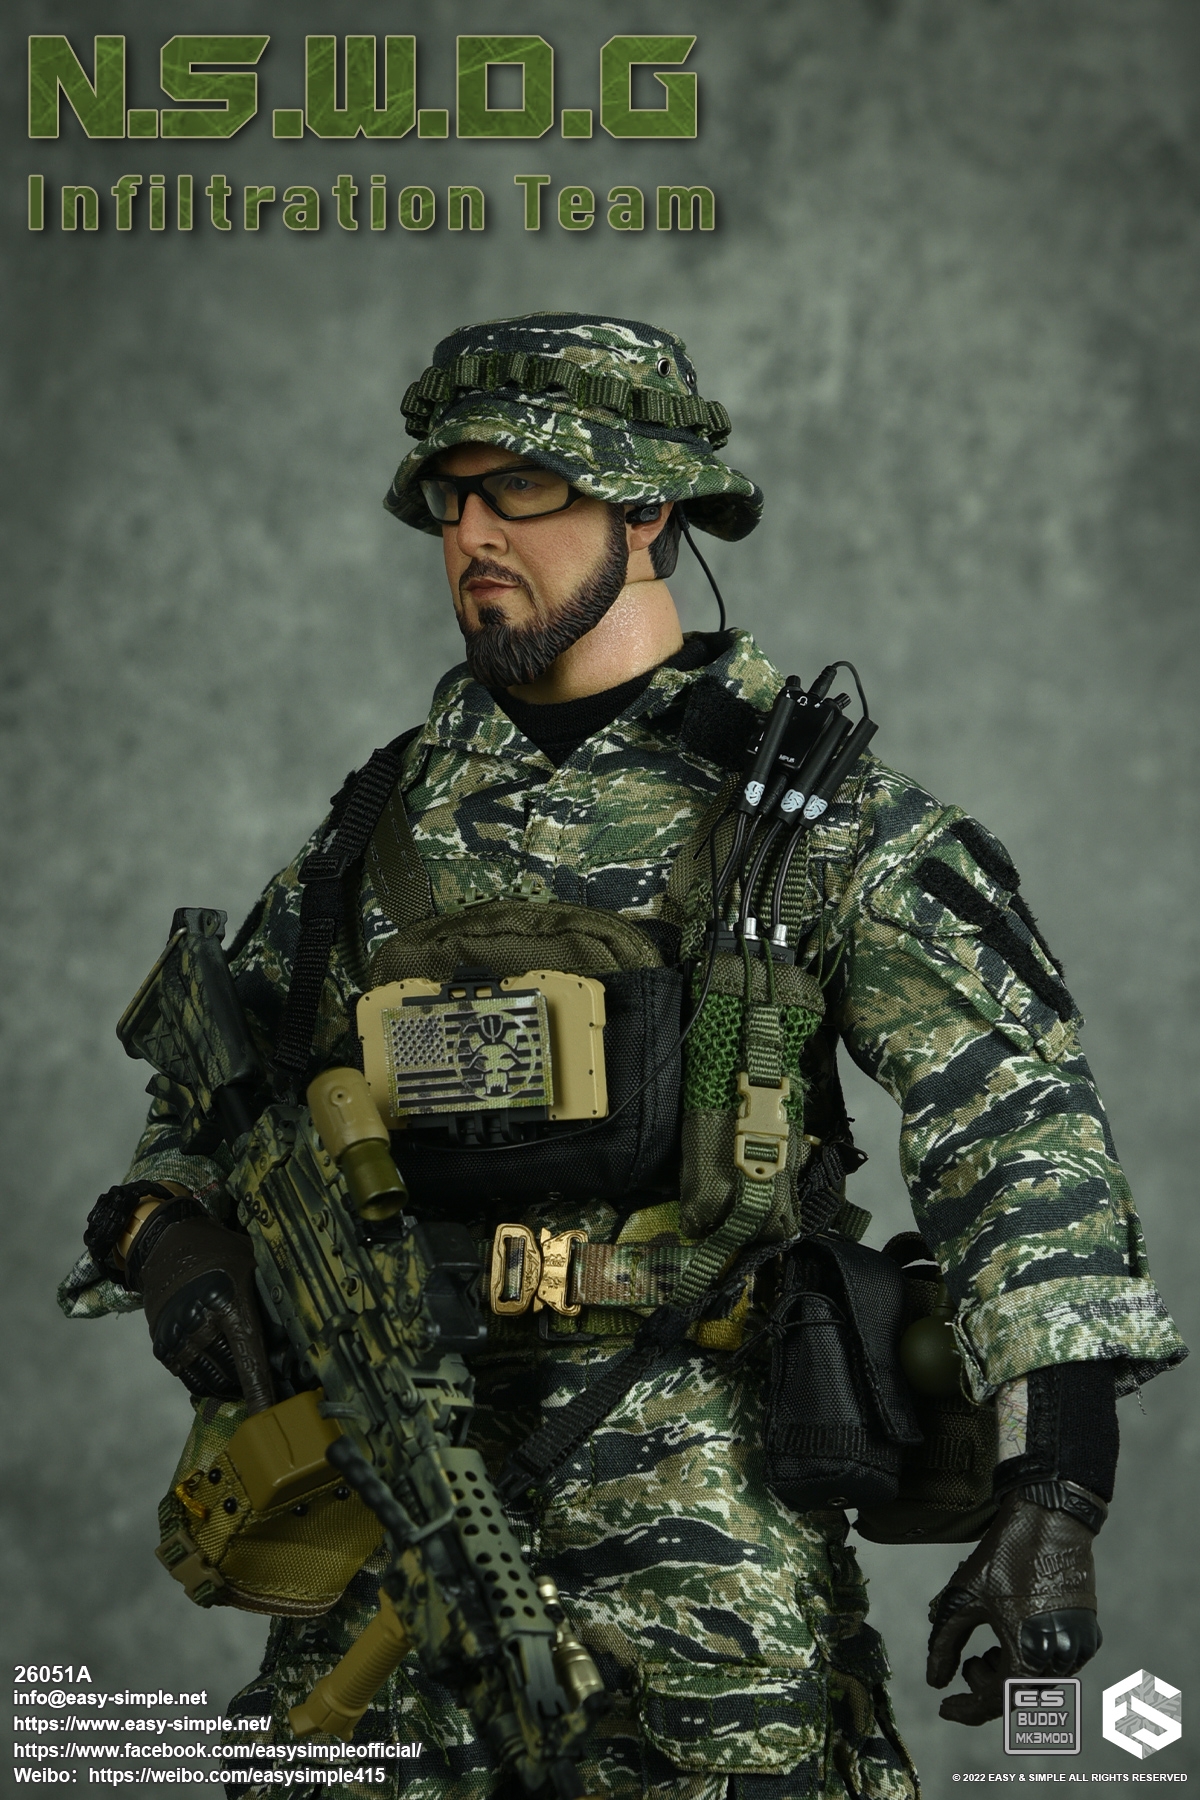 Easy&Simple 26051A N.S.W.D.G Infiltration Team,Boxed Figure